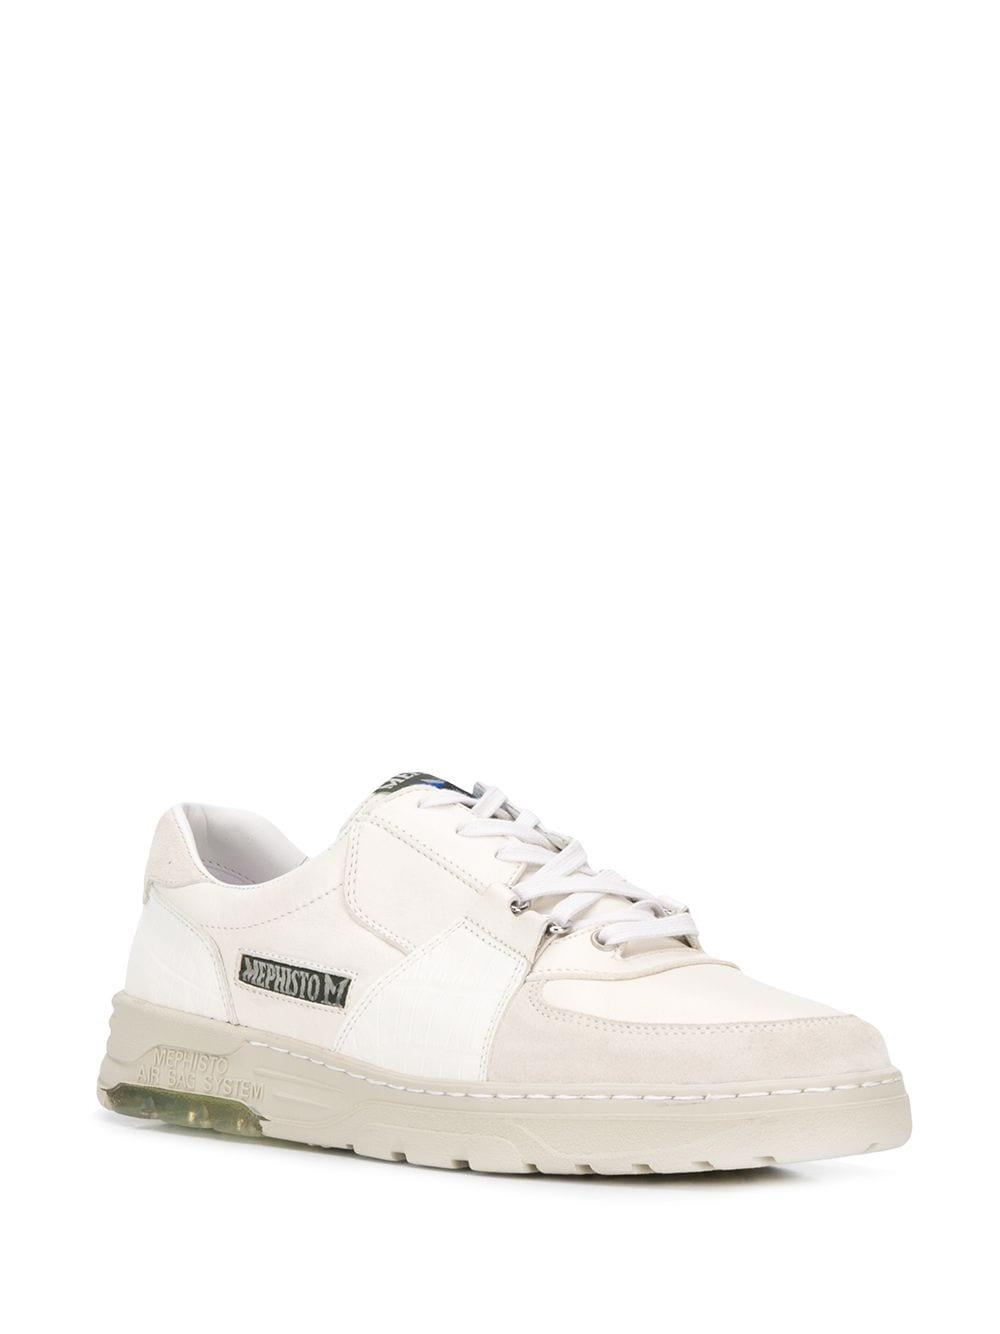 GR-Uniforma X Mephisto M Low-top Trainers in White for Men | Lyst